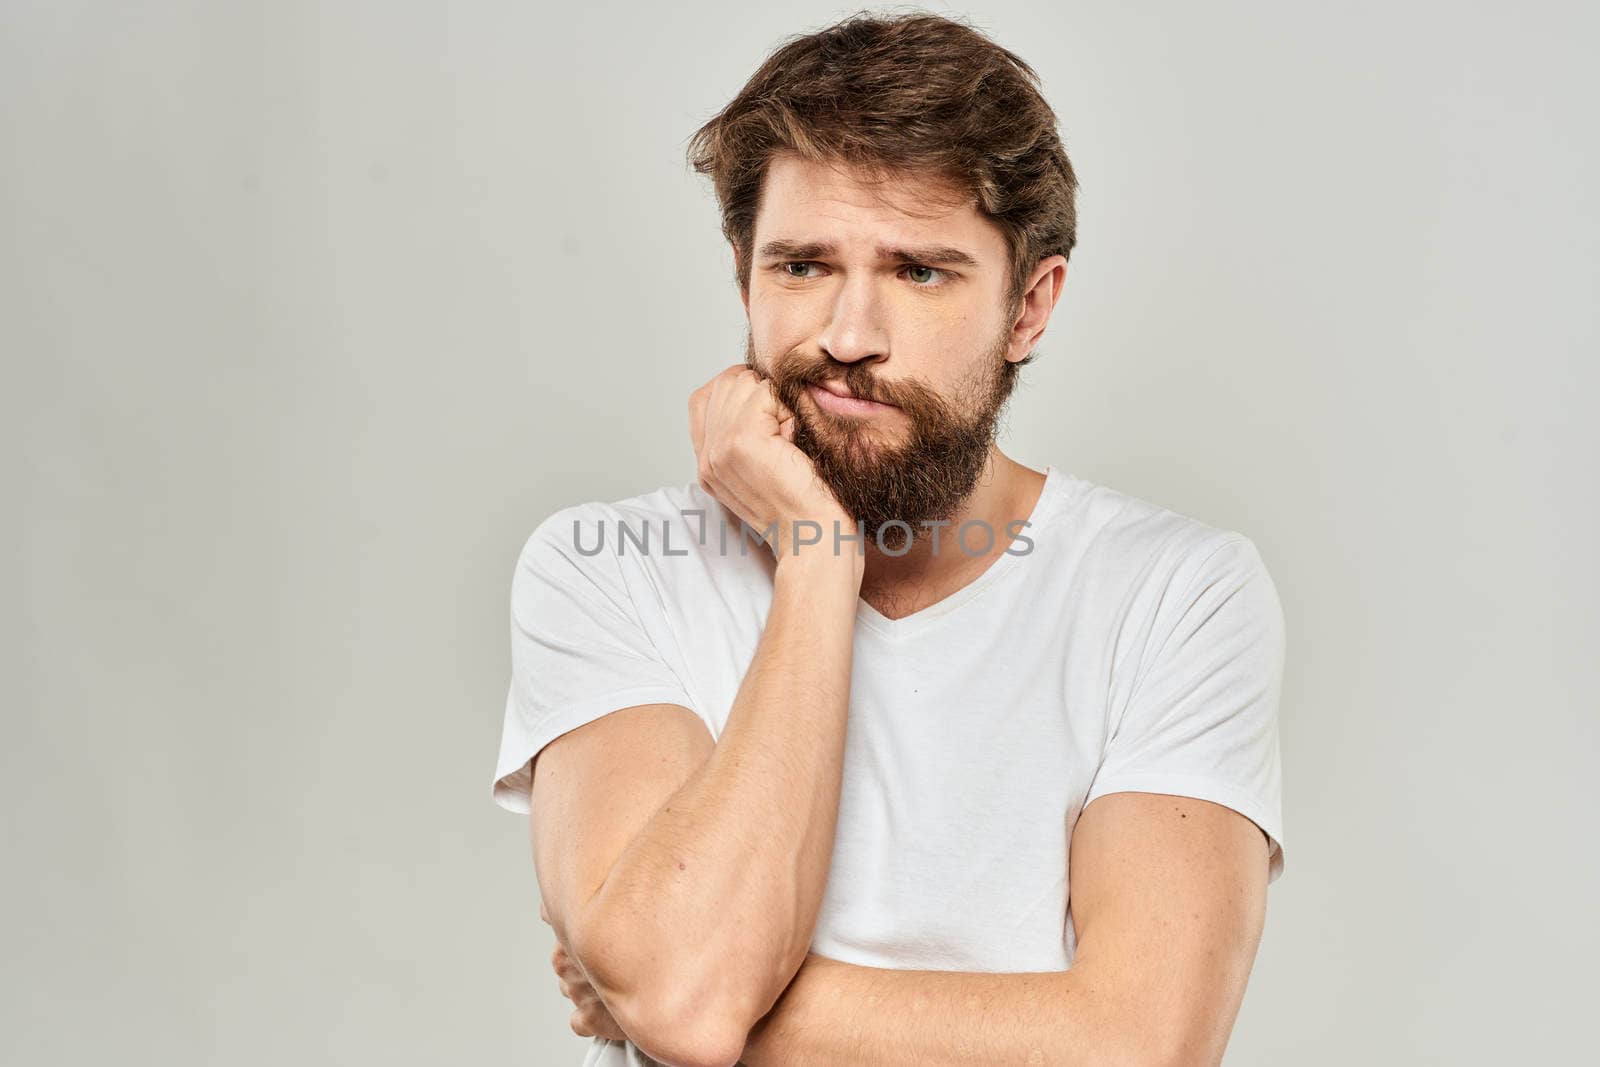 A man in a white t-shirt with a beard emotions displeased facial expression light background. High quality photo